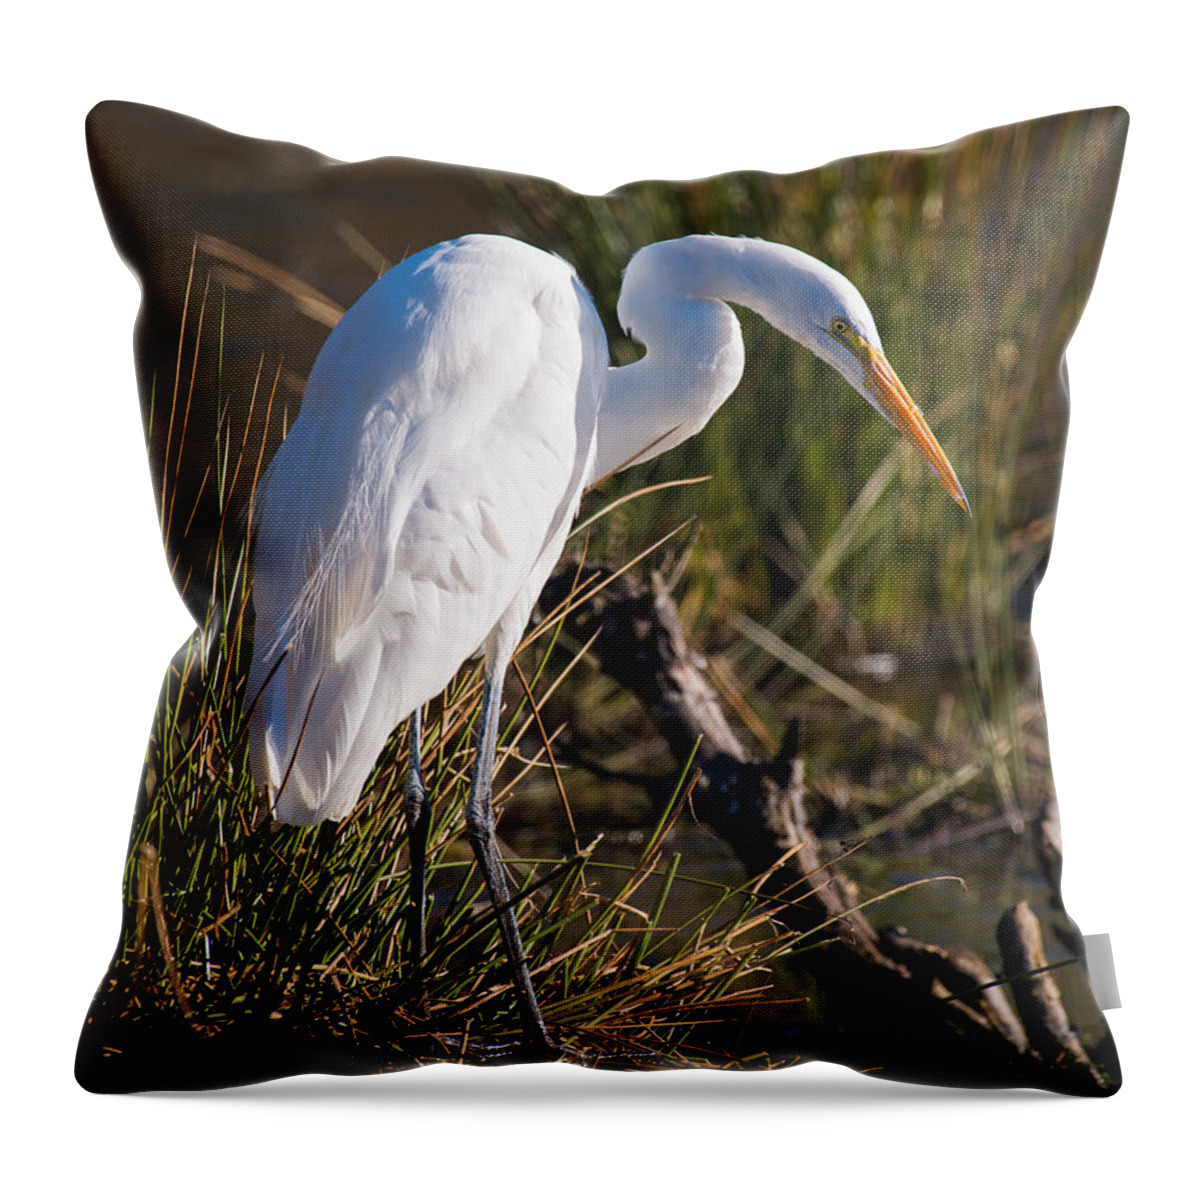 Great White Egret Hunt Hunting Looking For Lunch Day Sun Sunny Sunshine Fall Autumn Vertical Wildlife Bird Birds Refuge Nature Throw Pillow featuring the photograph Looking For Lunch by Patrick Campbell